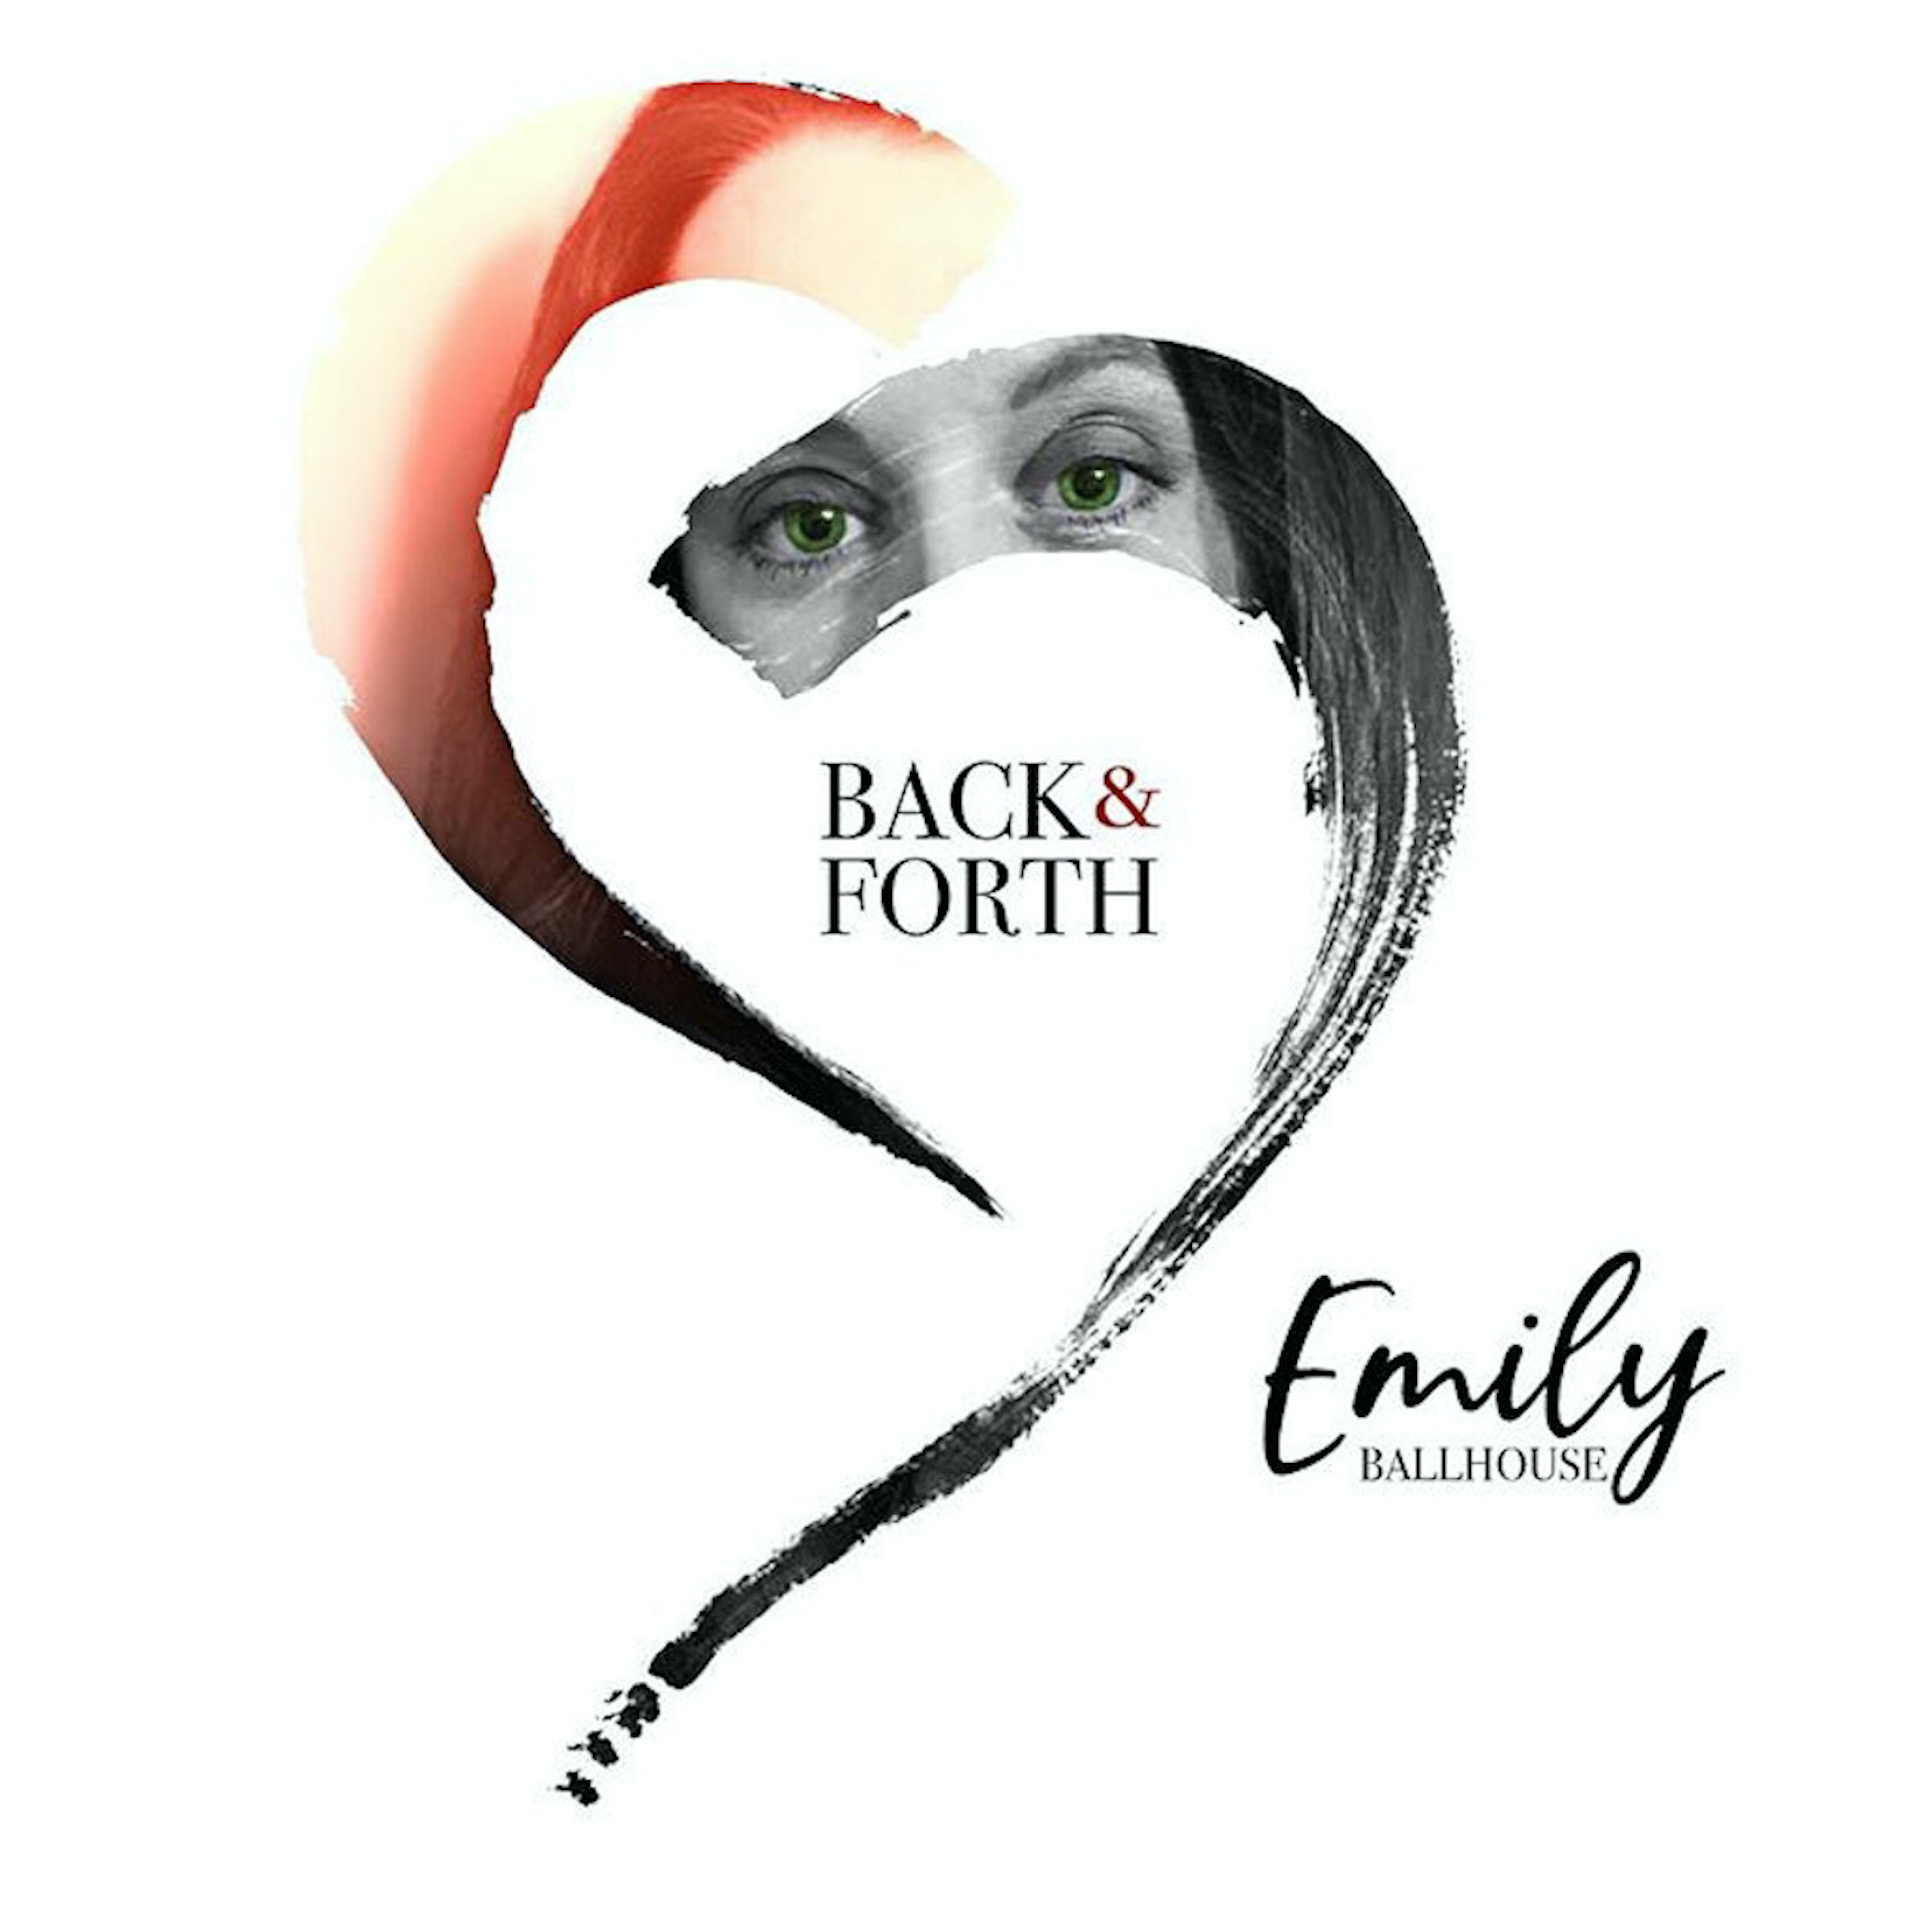 Emily Ballhouse Brings the Love With New Single